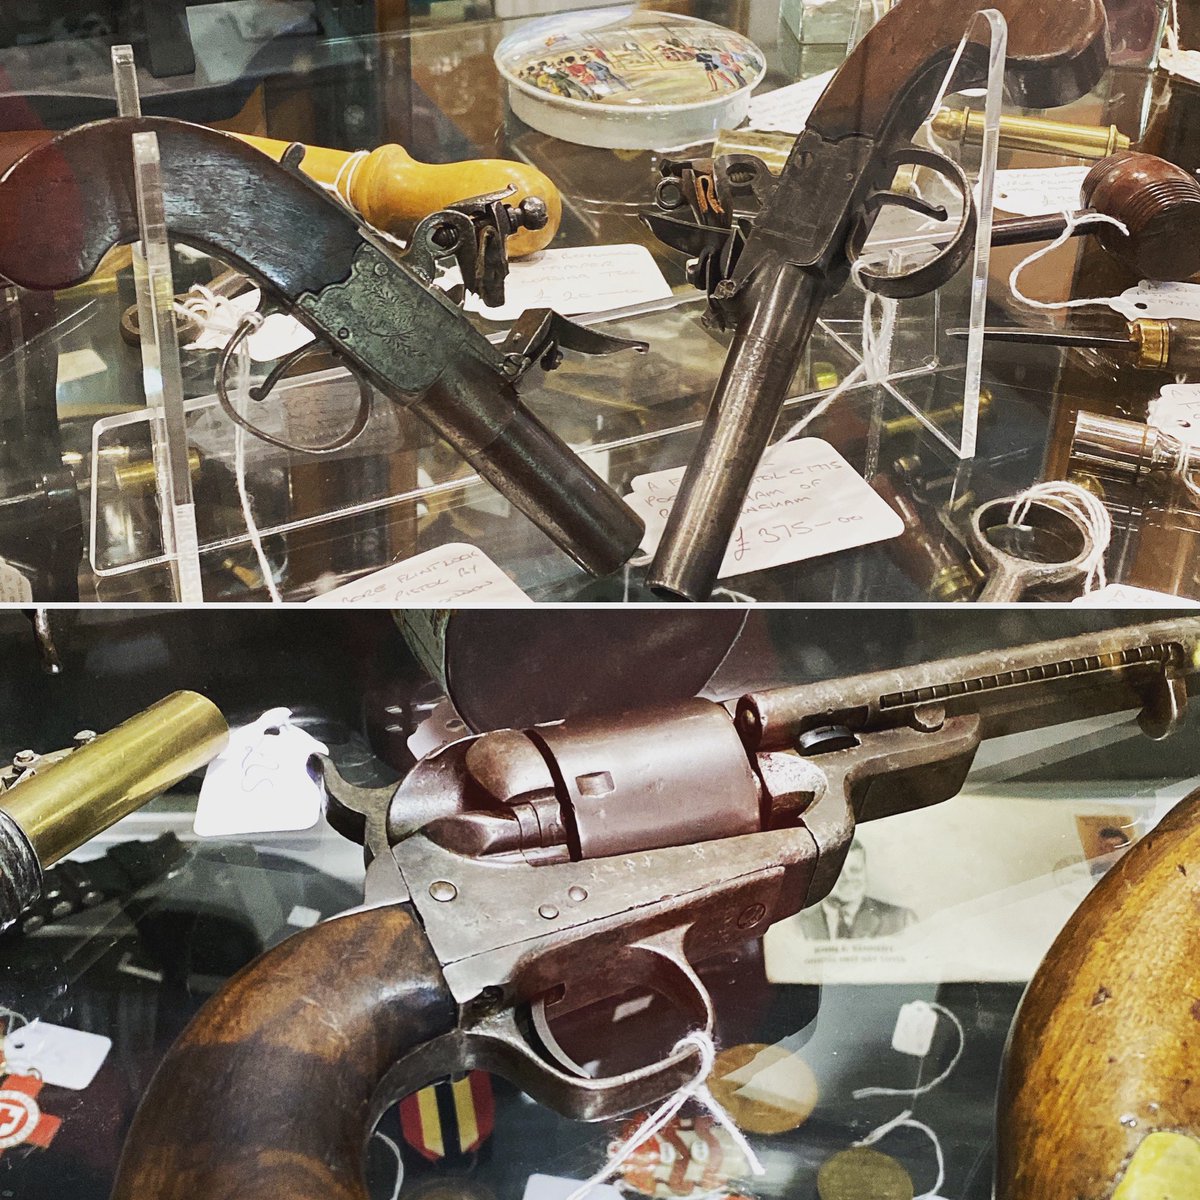 We have a good selection of antique firearms and military items from various dealers here at @astraantiques #flintlockpistol #hilloflondon #50bore #pocketpistol #spchin #rarecolt #richardmasons #militaria #antiquepistols #antiquefirearms #astraantiquescentre #hemswell